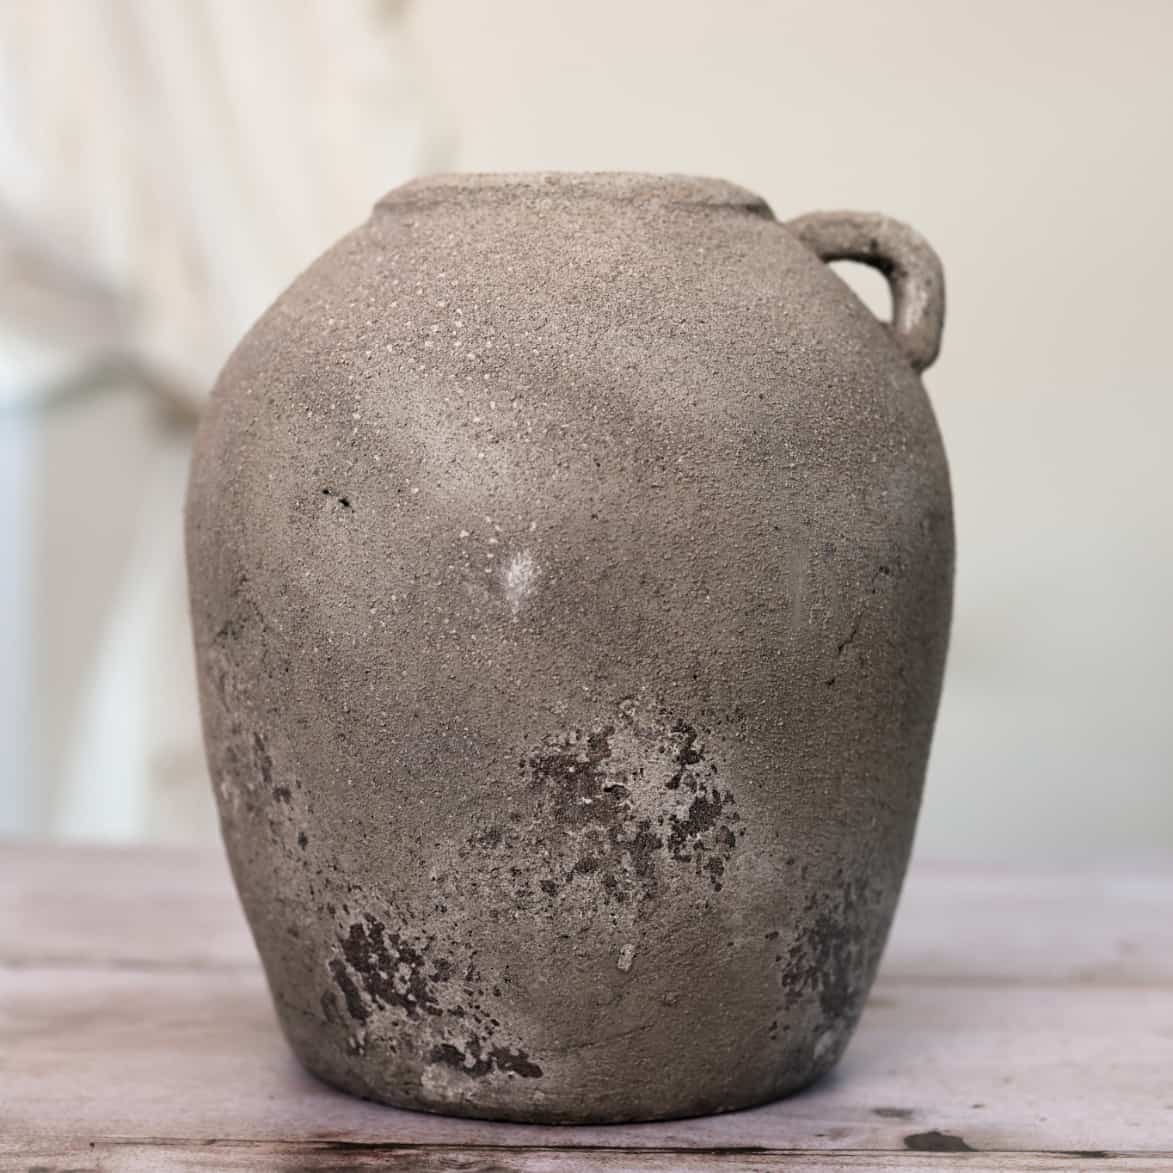 Distressed grey vase with small handle at the top on wooden table.